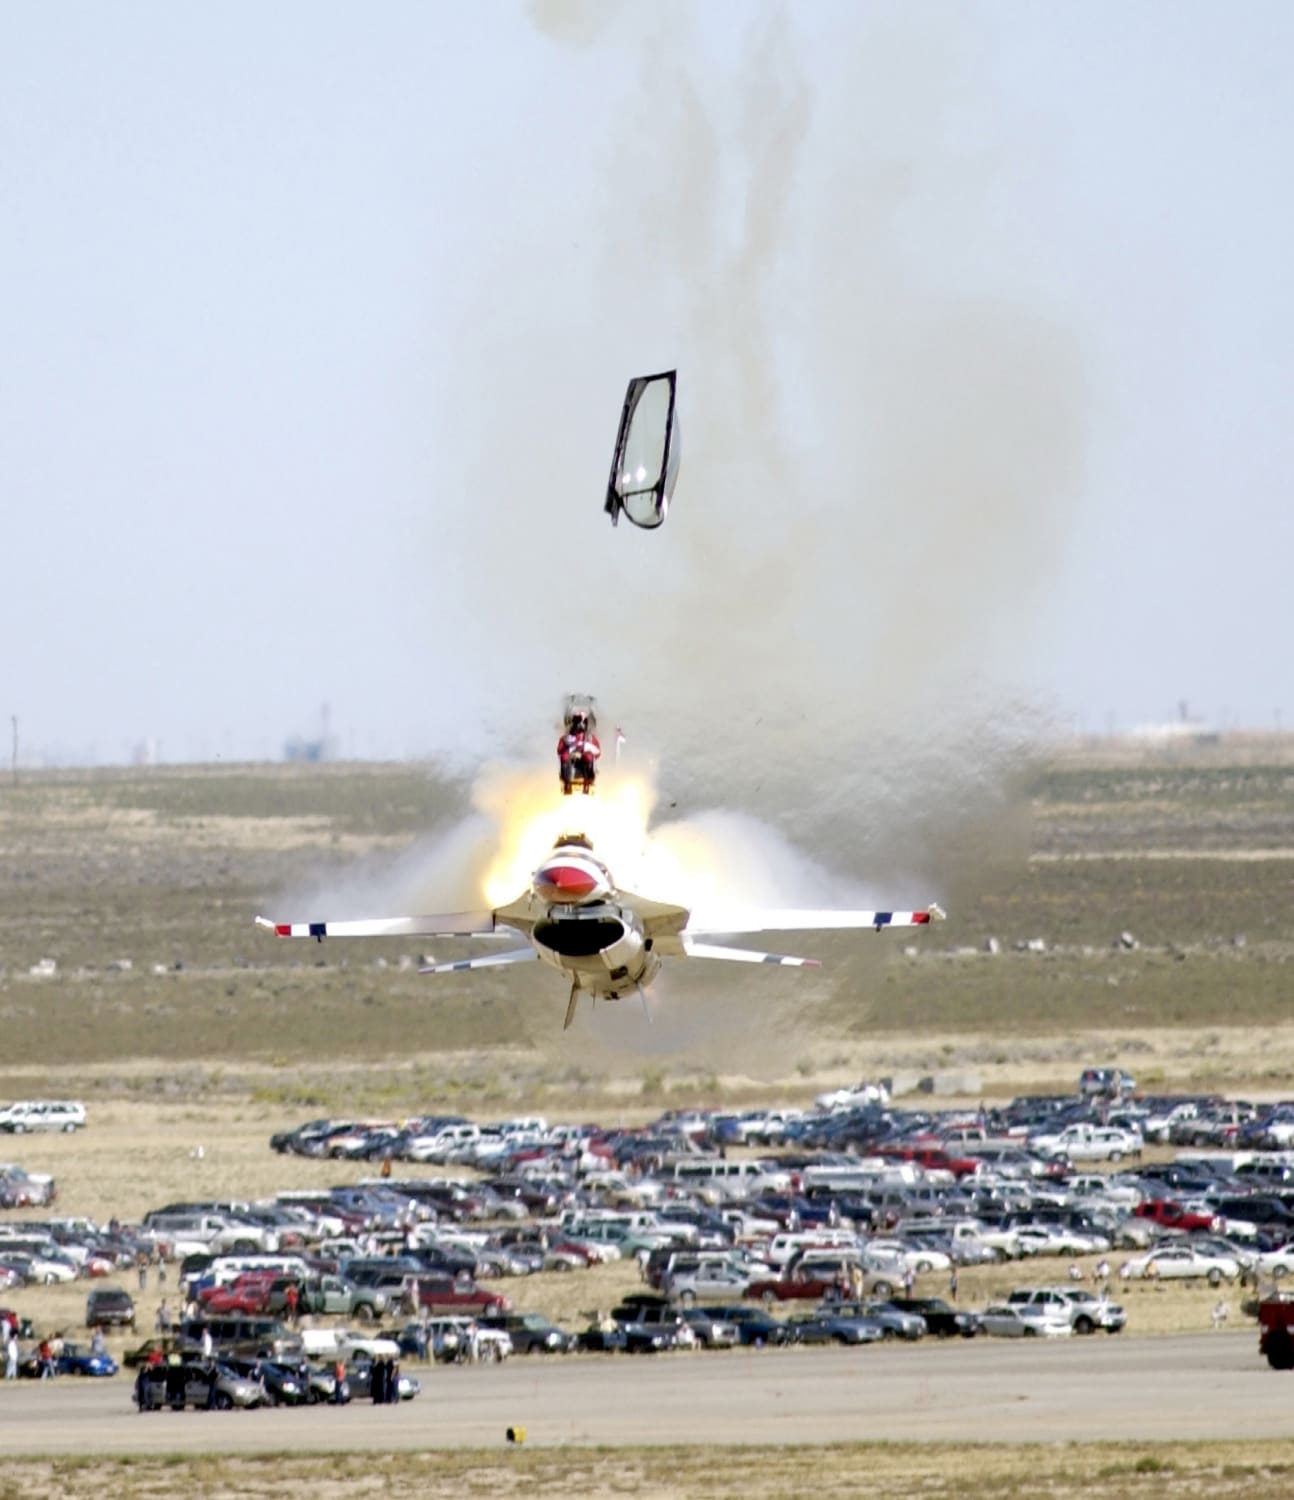 Capt. Chris Stricklin ejects from his F-16 less than one second before impact, surviving with only minor injuries -- USAF photo by Staff Sgt. Bennie J. Davis III